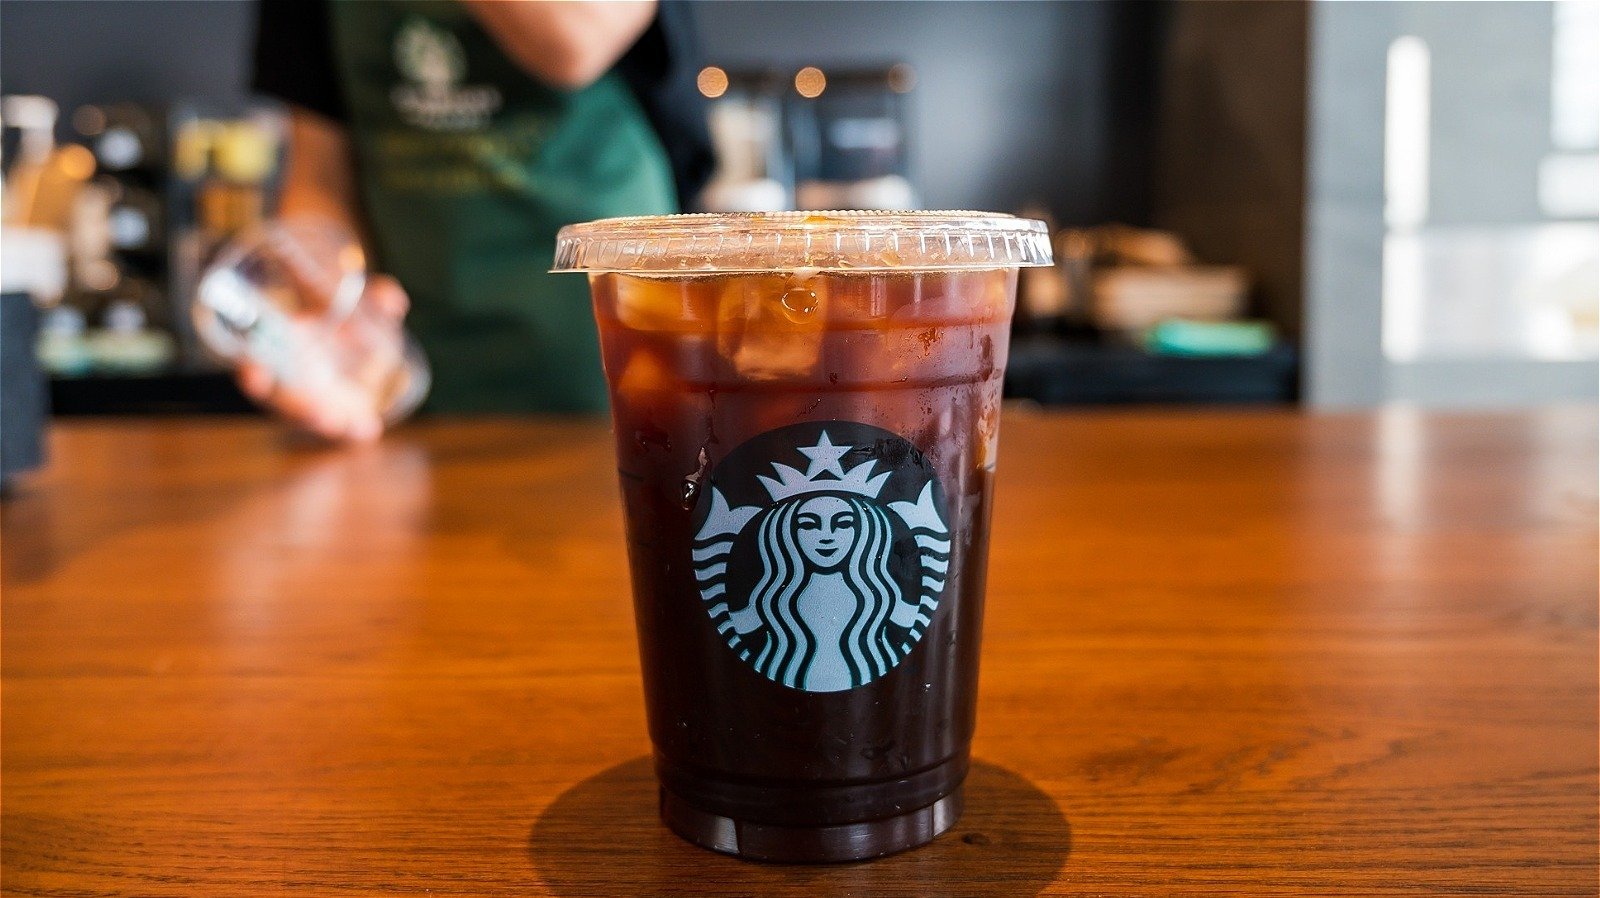 The Starbucks Union Battle Just Took An Unexpected Turn